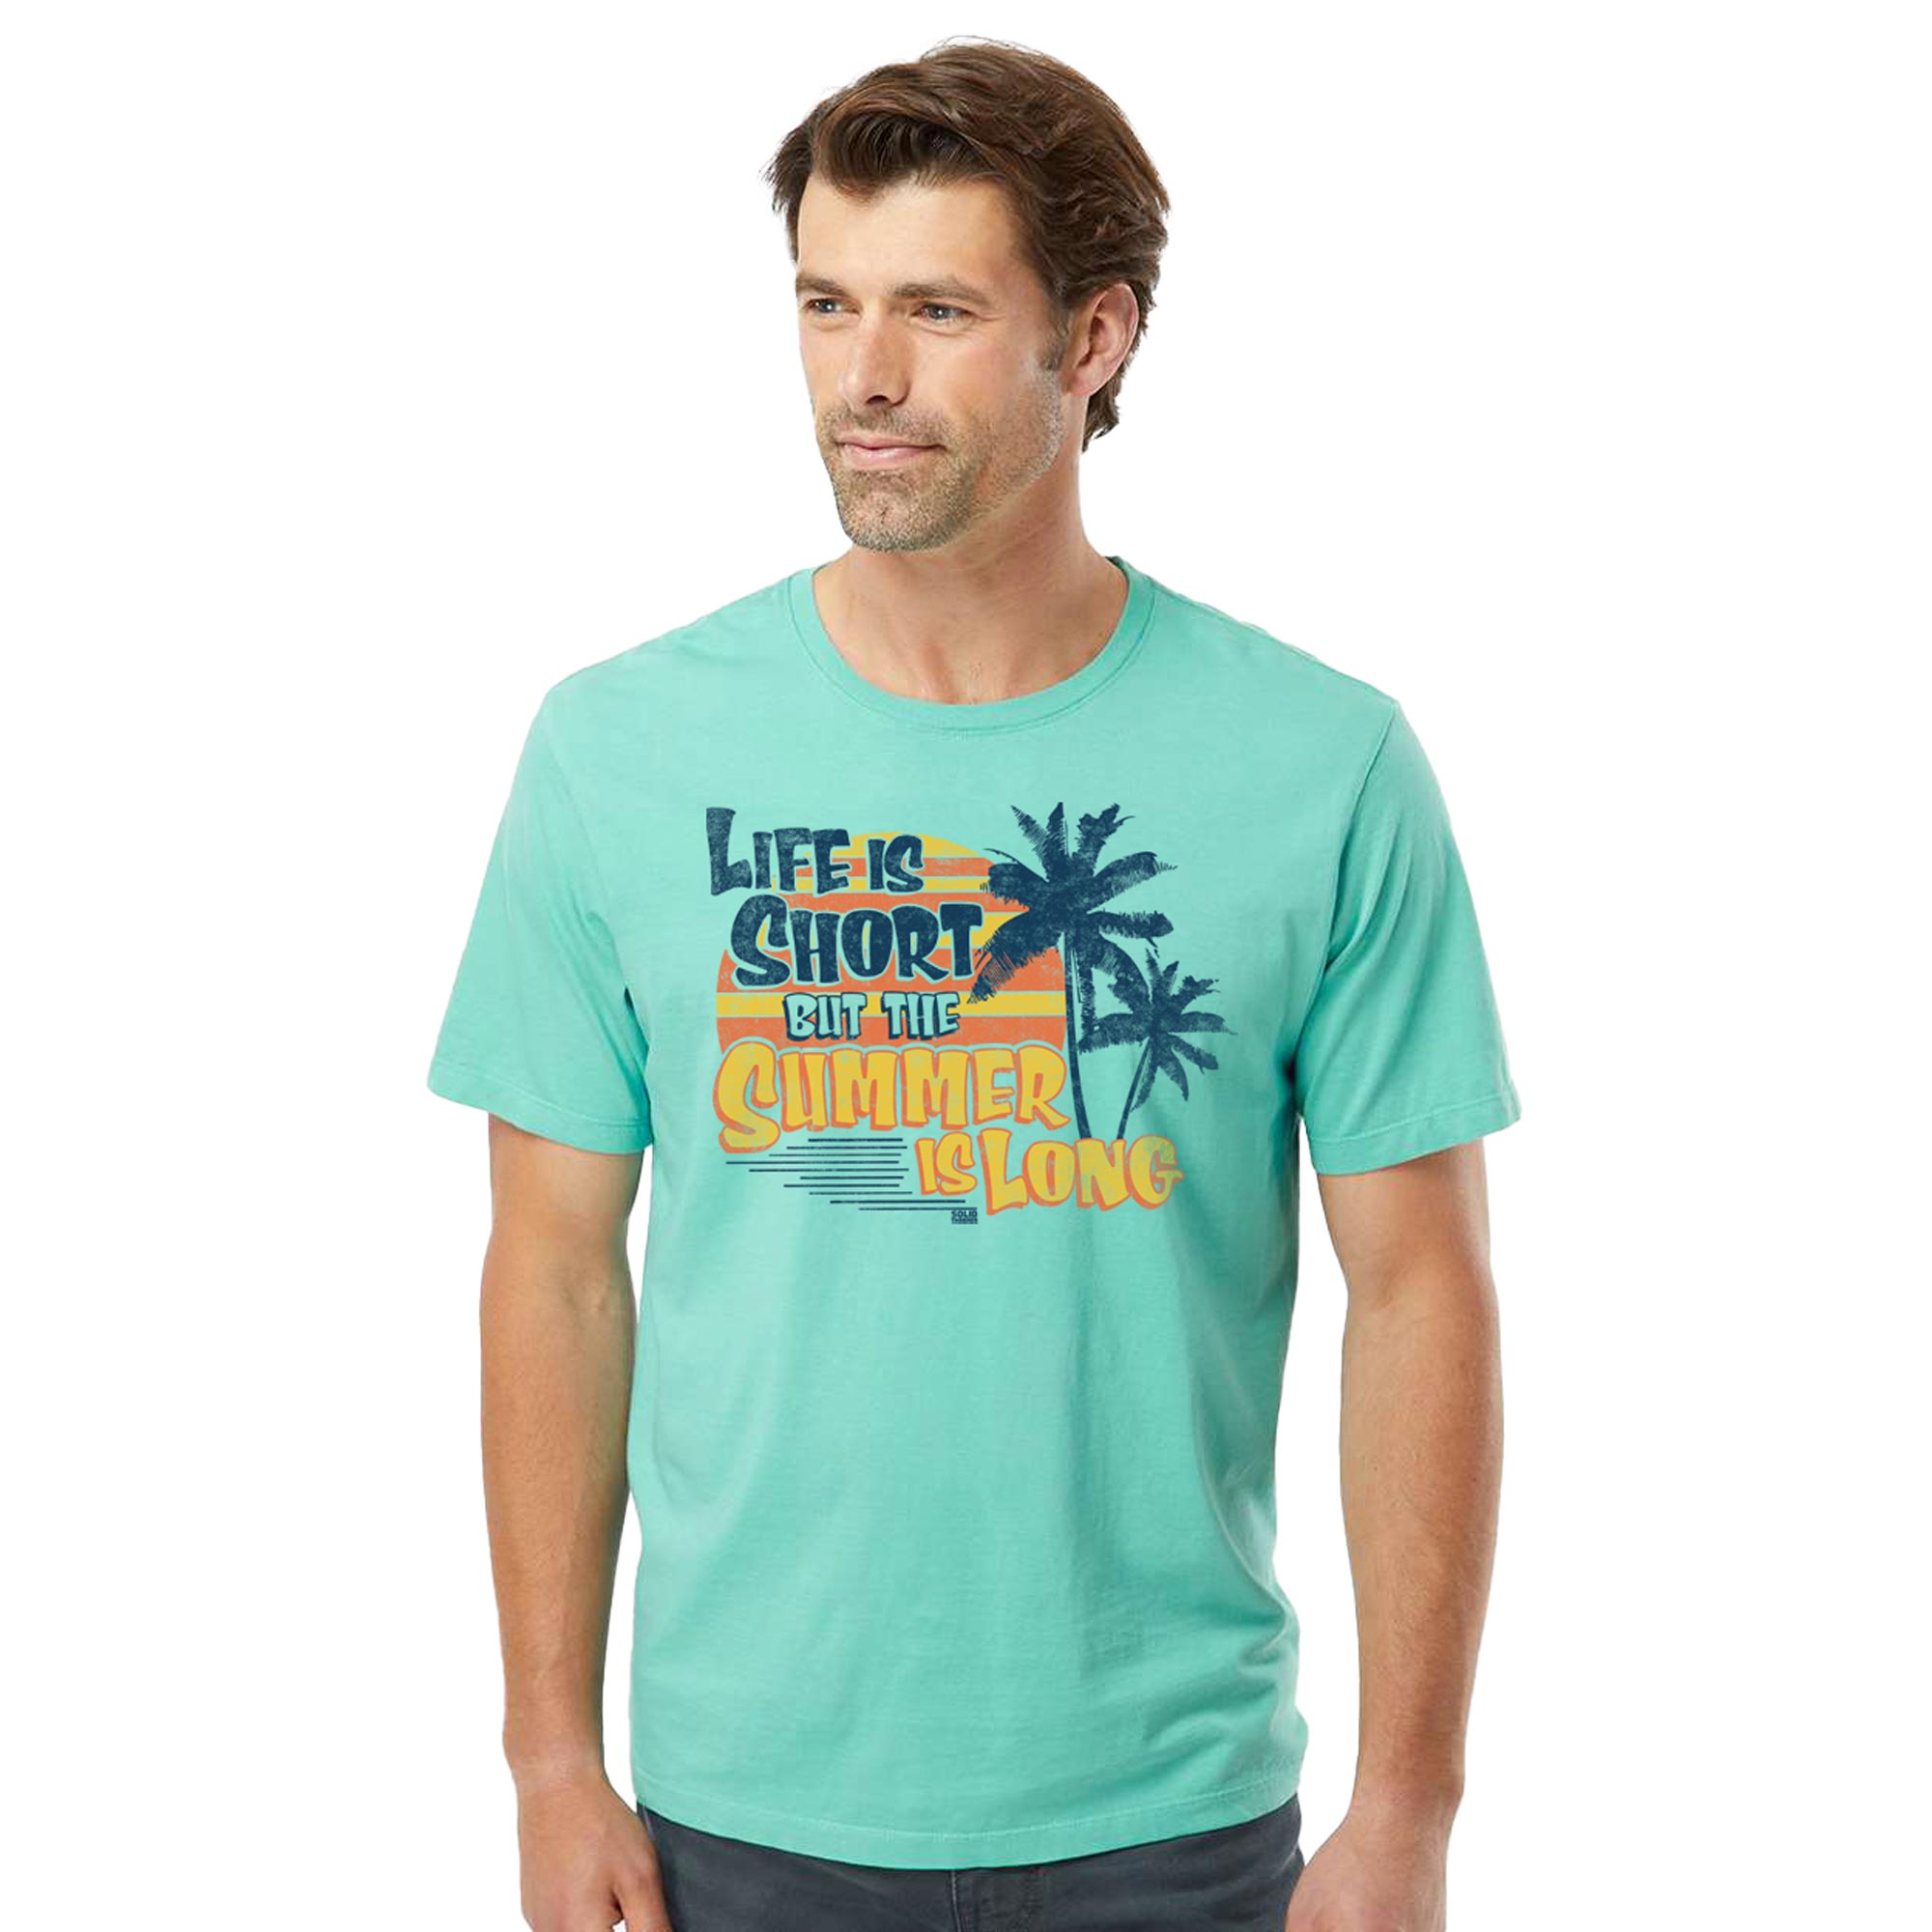 Life Is Short But The Summer Is Long Cool Organic Cotton T-shirt | Vintage Beach   Tee On Model | Solid Threads